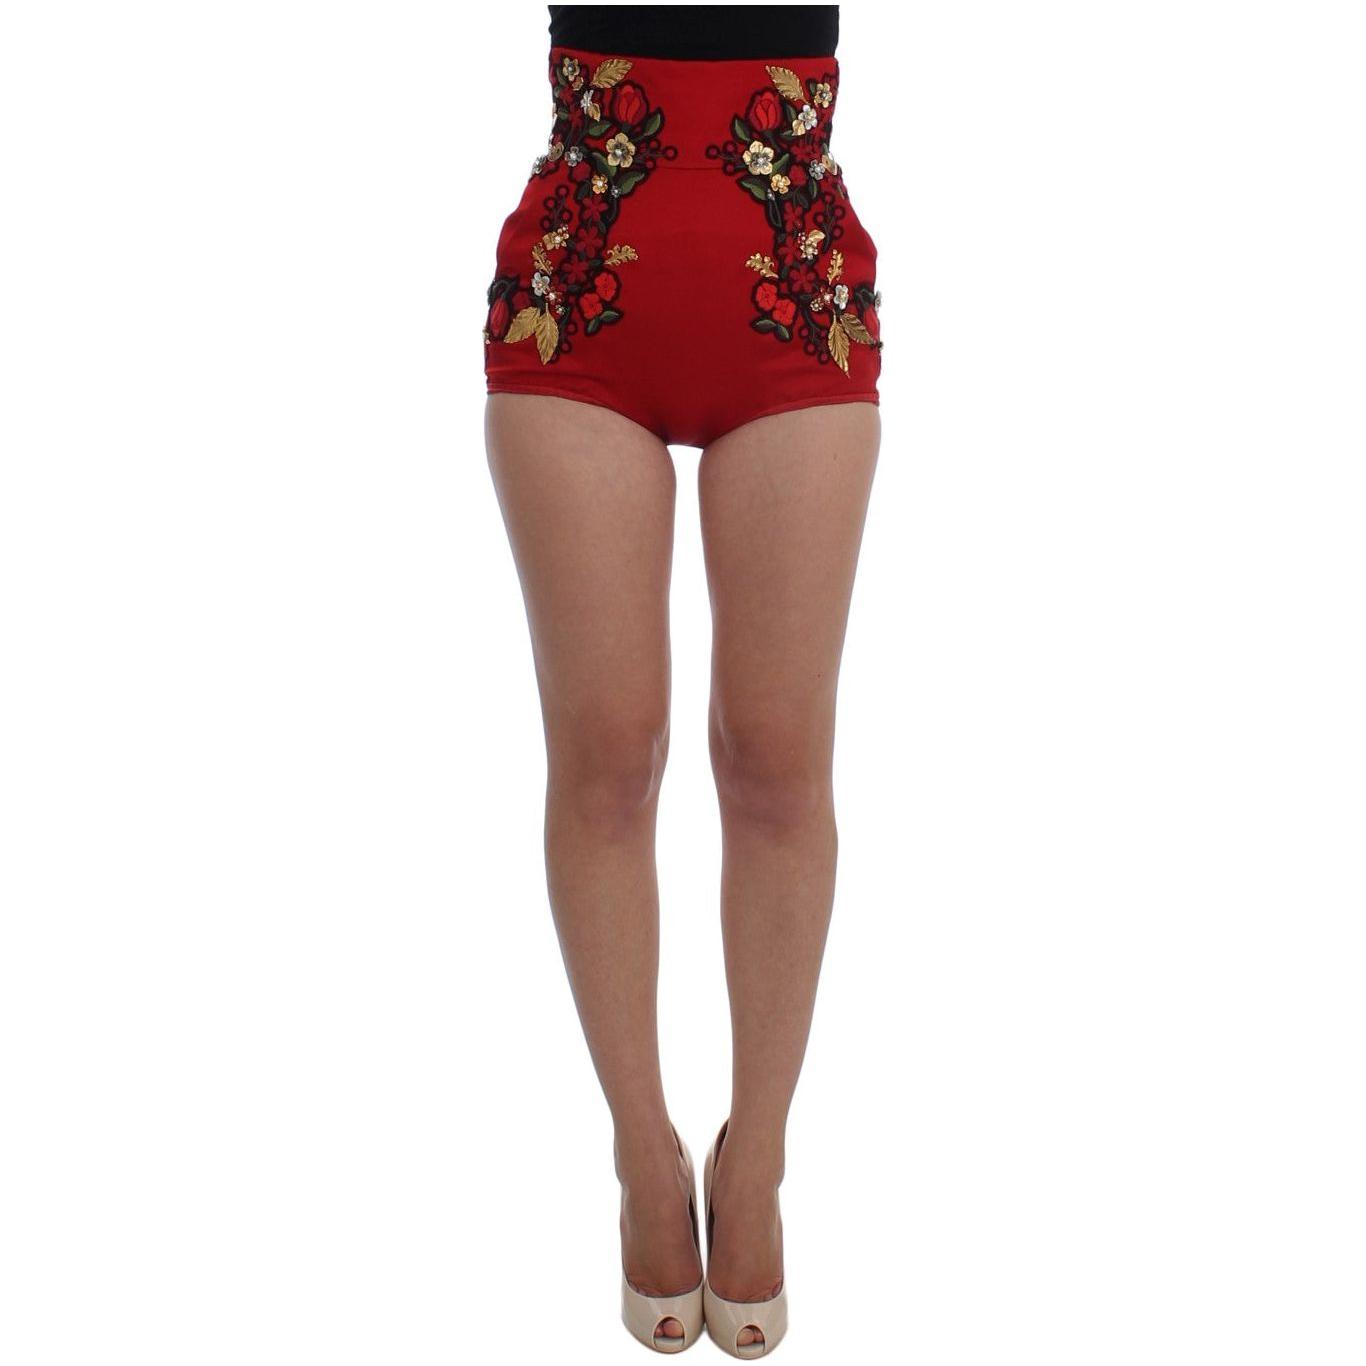 Dolce & Gabbana Elegant Silk Red Embroidered Mini Shorts red-silk-pearls-roses-shorts